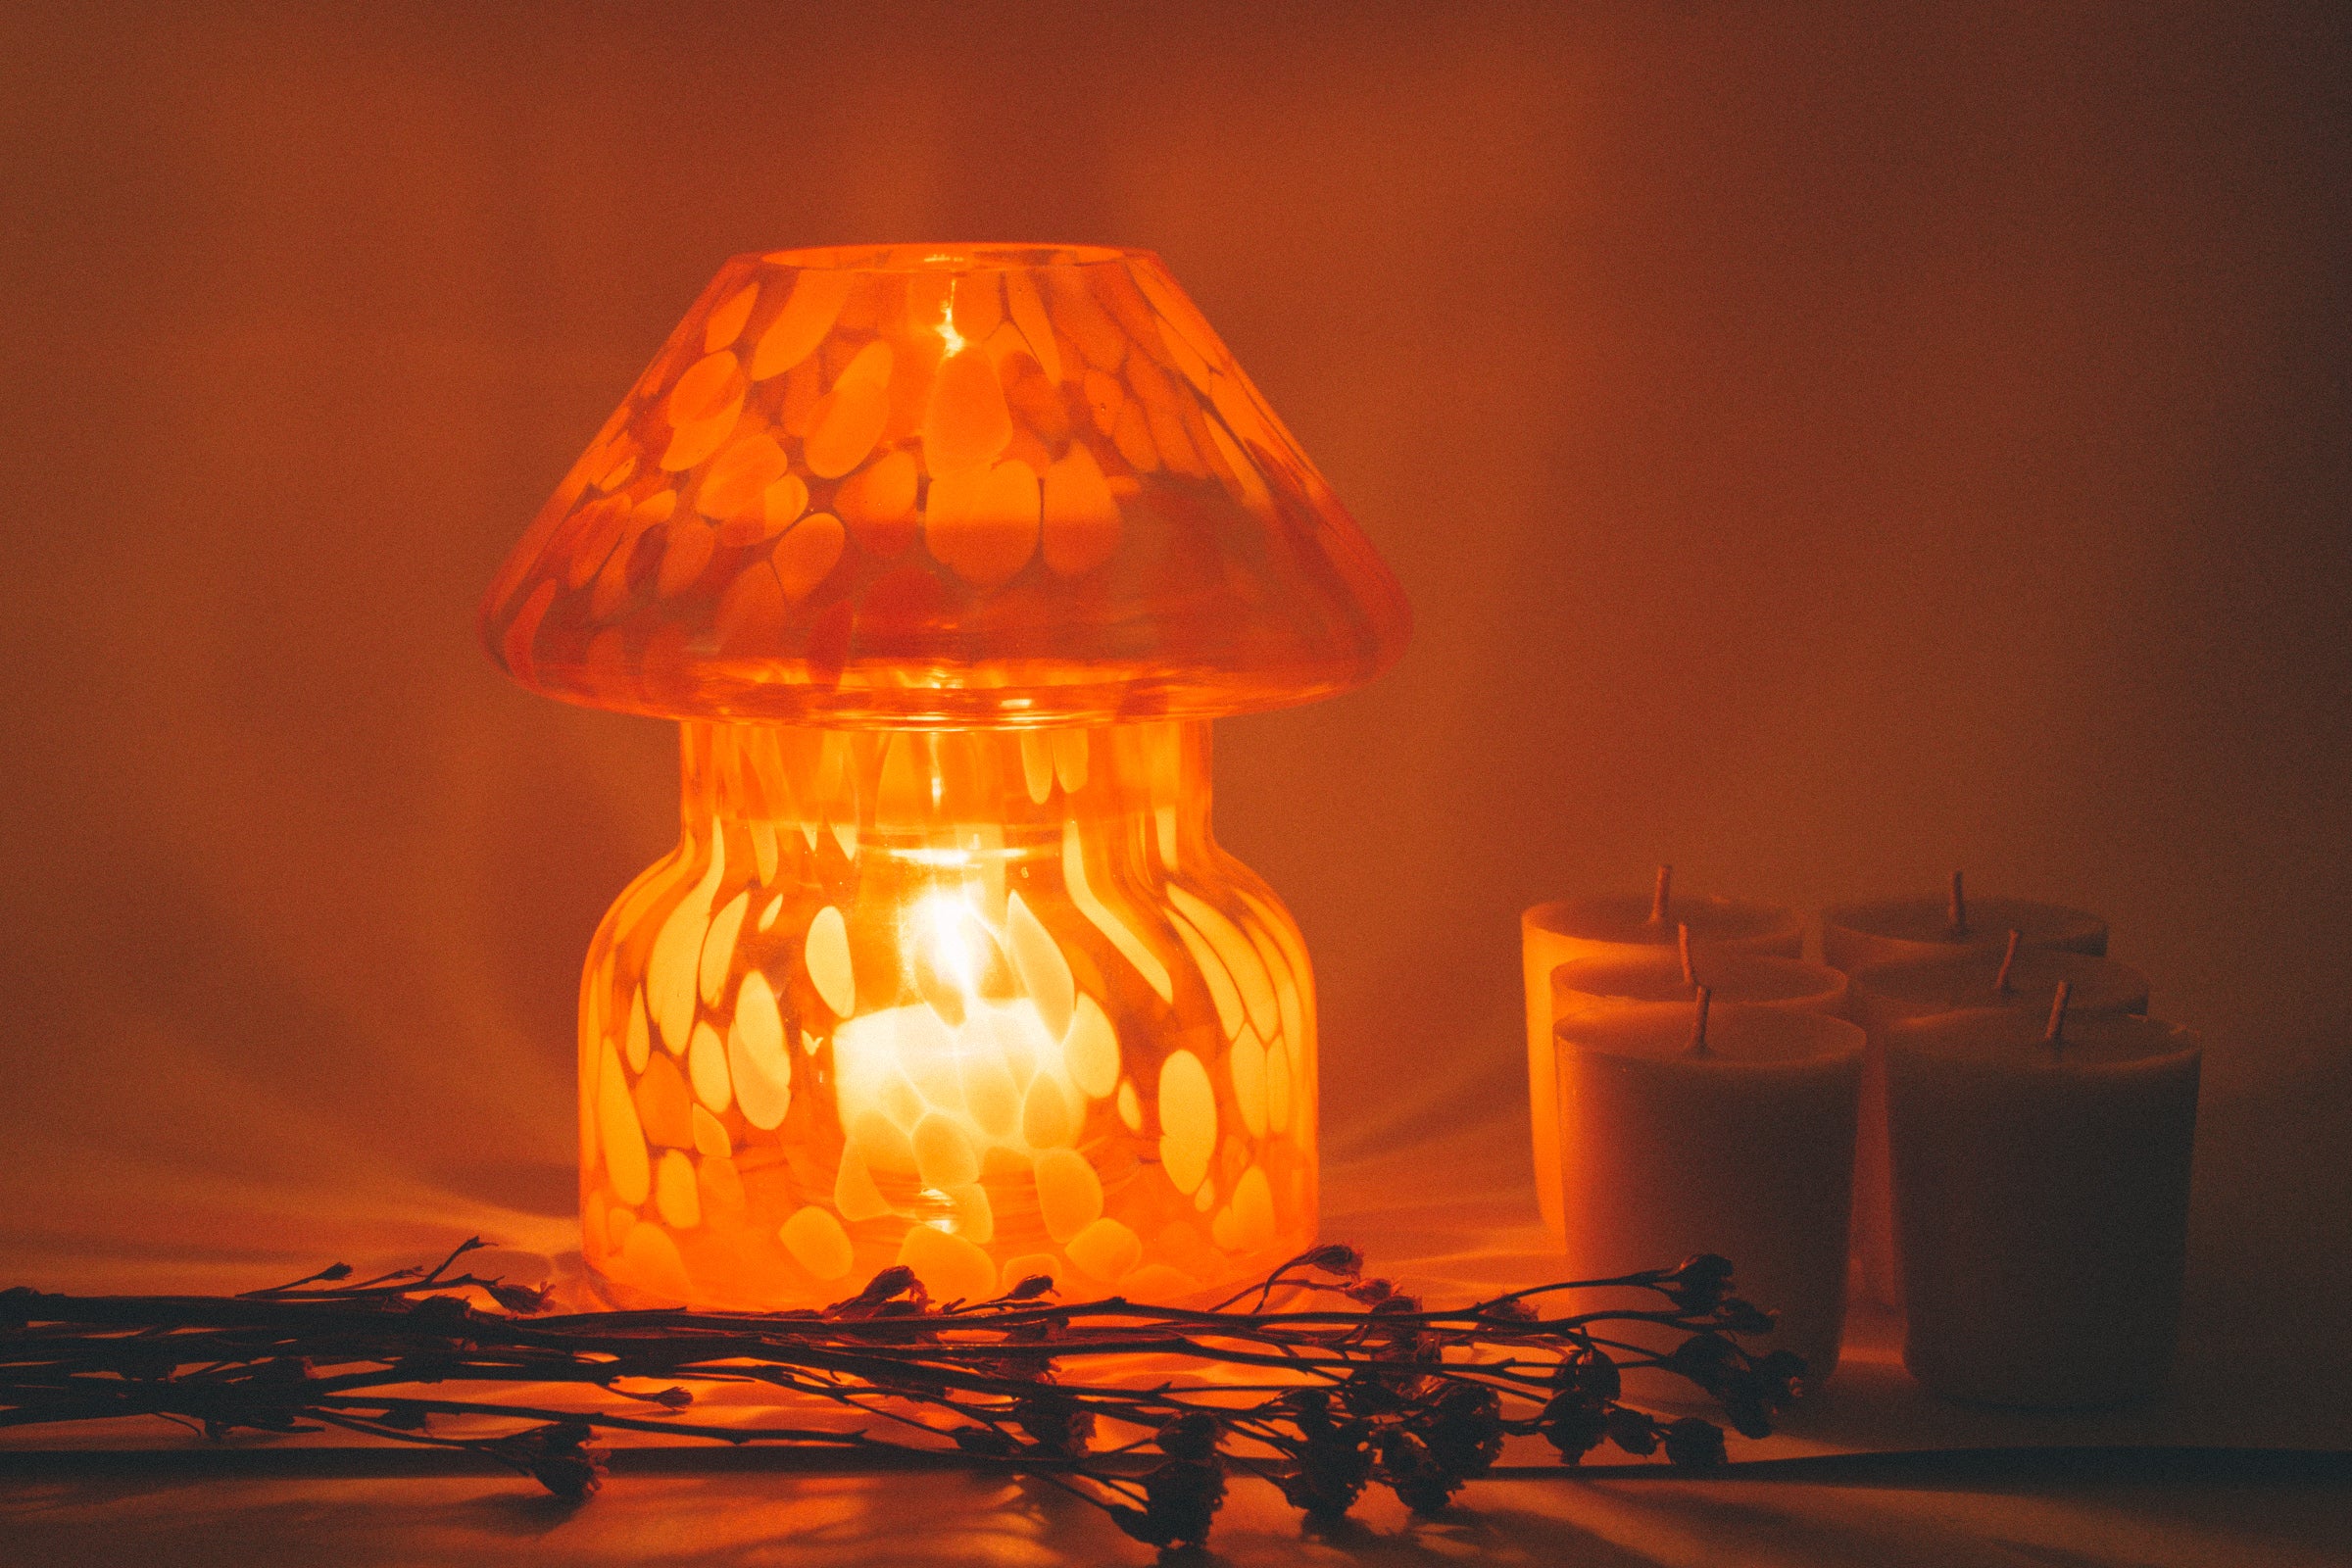 mushroom candle lamp refills next to lit lava candle lamp.